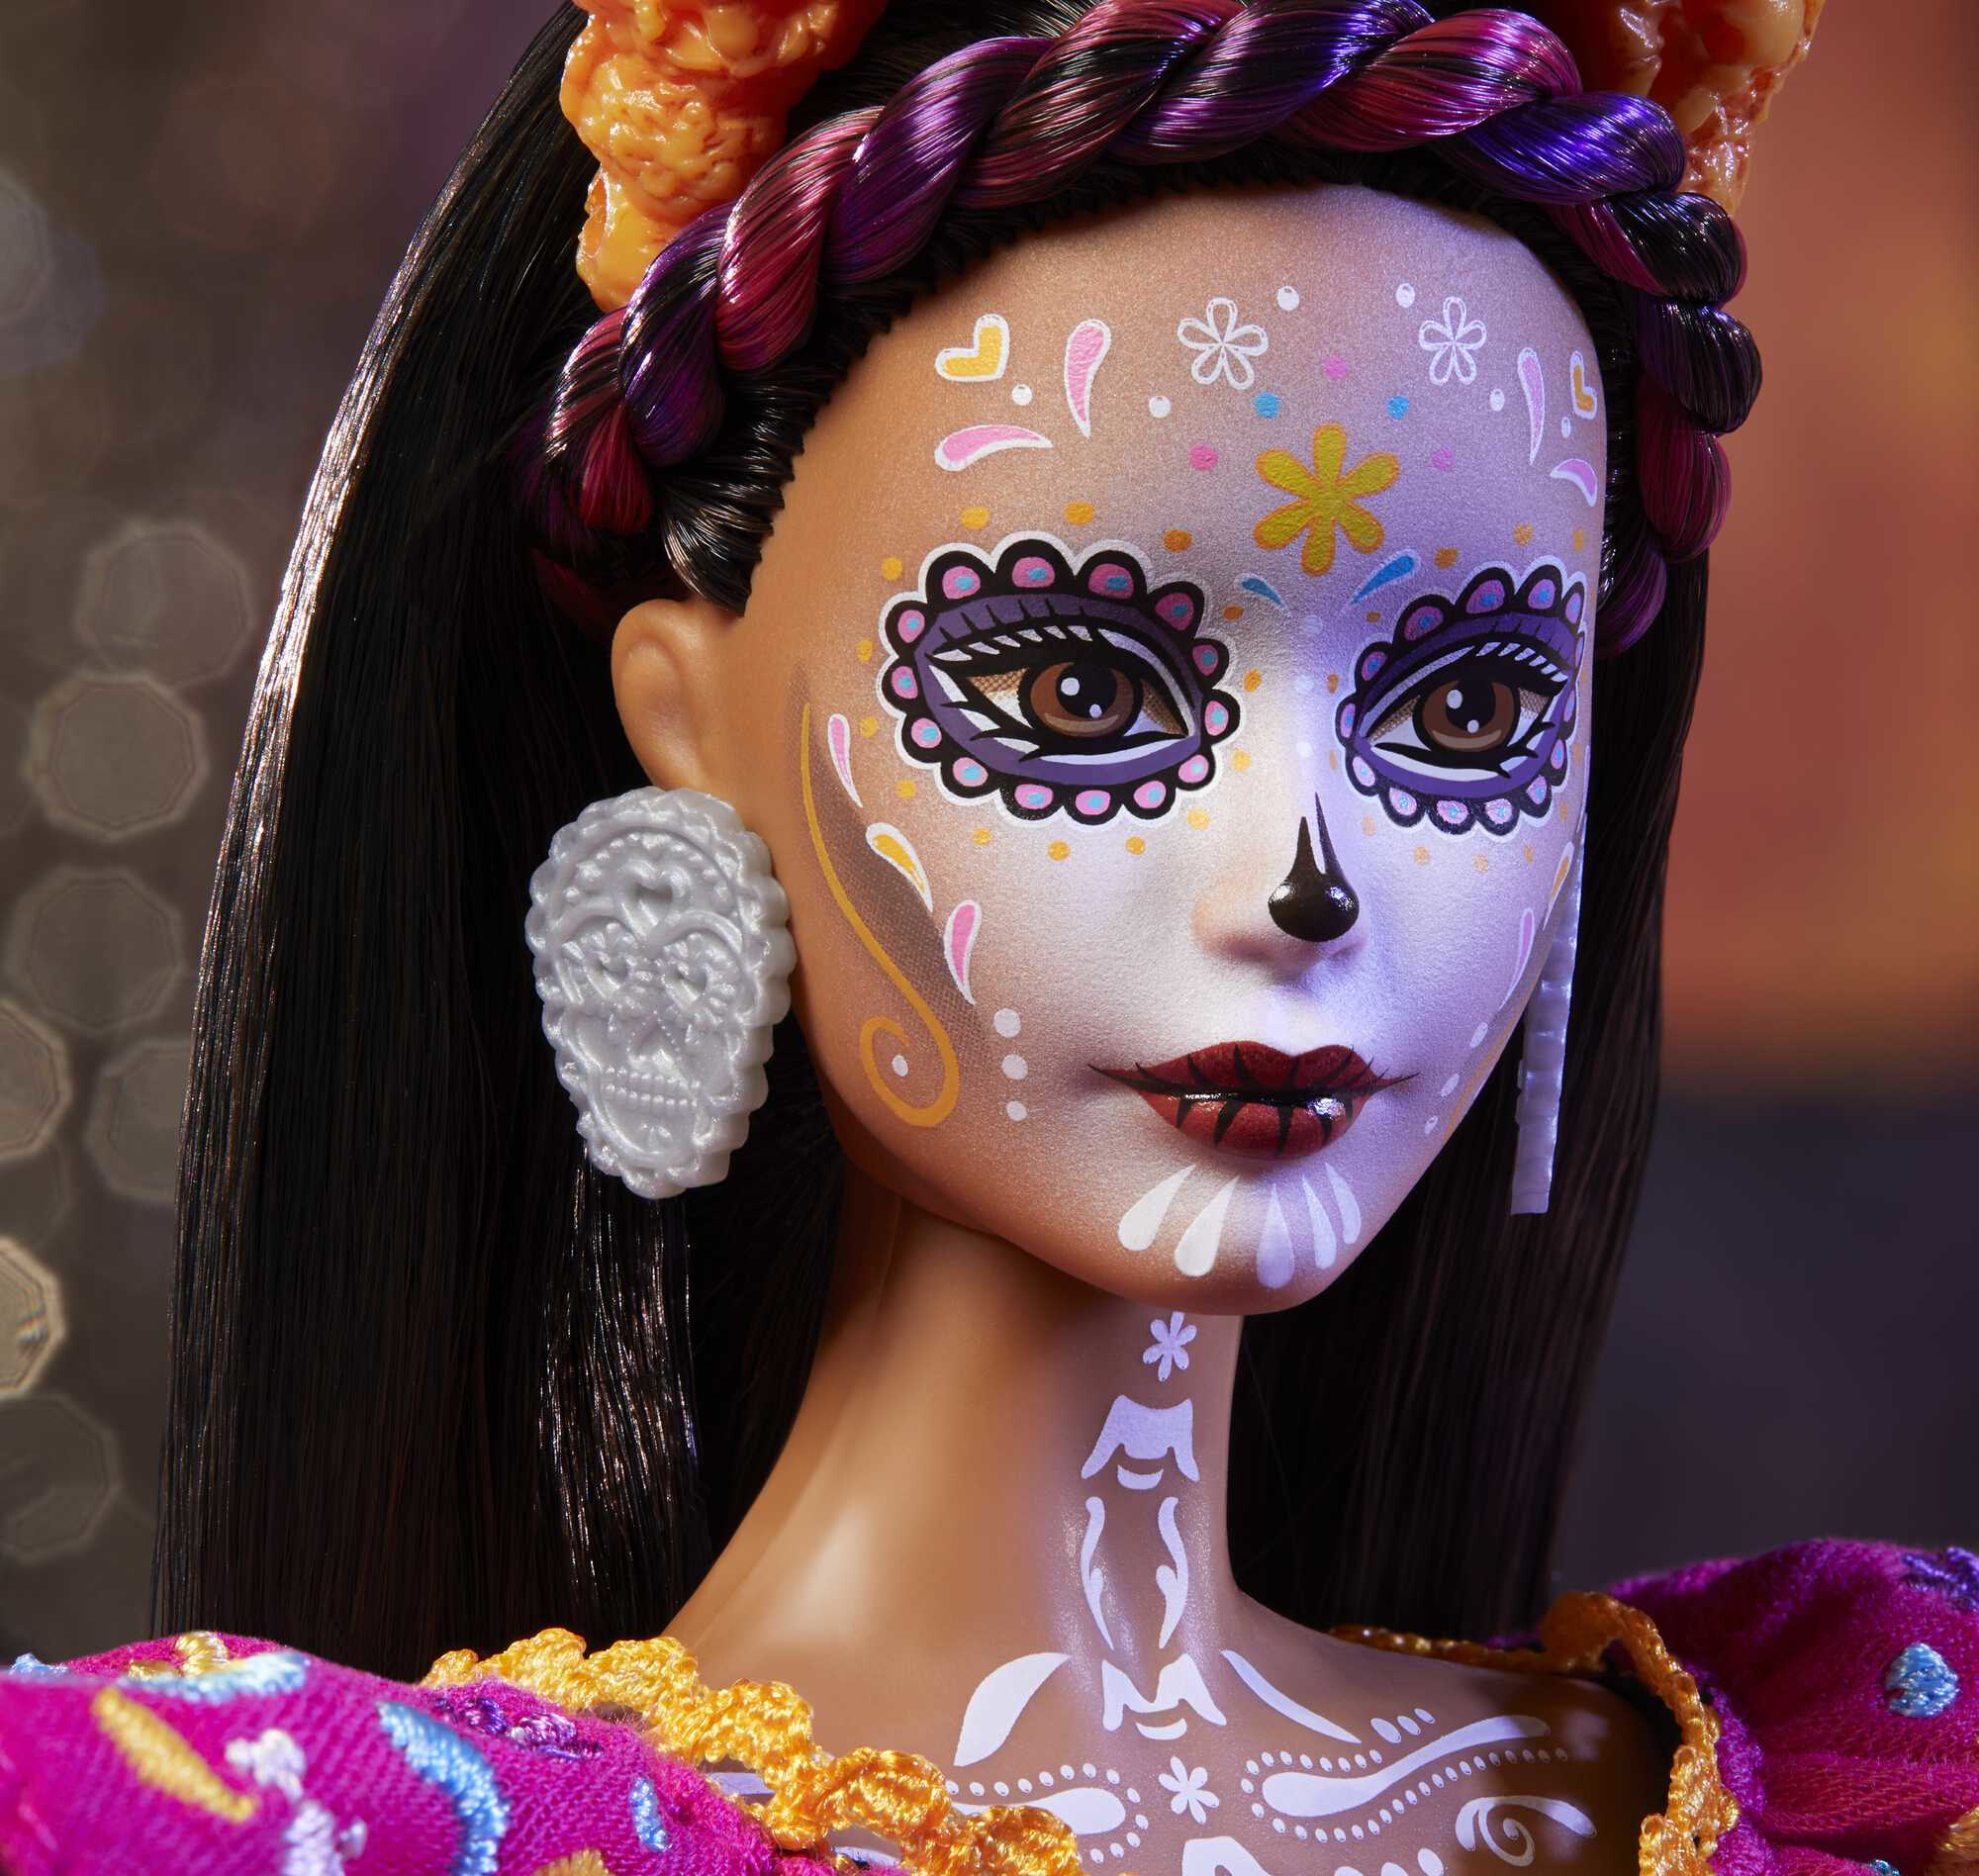 Barbie Signature 2022 Dia de Muertos Collectible Doll in Embroidered Dress & Flower Crown - image 4 of 7